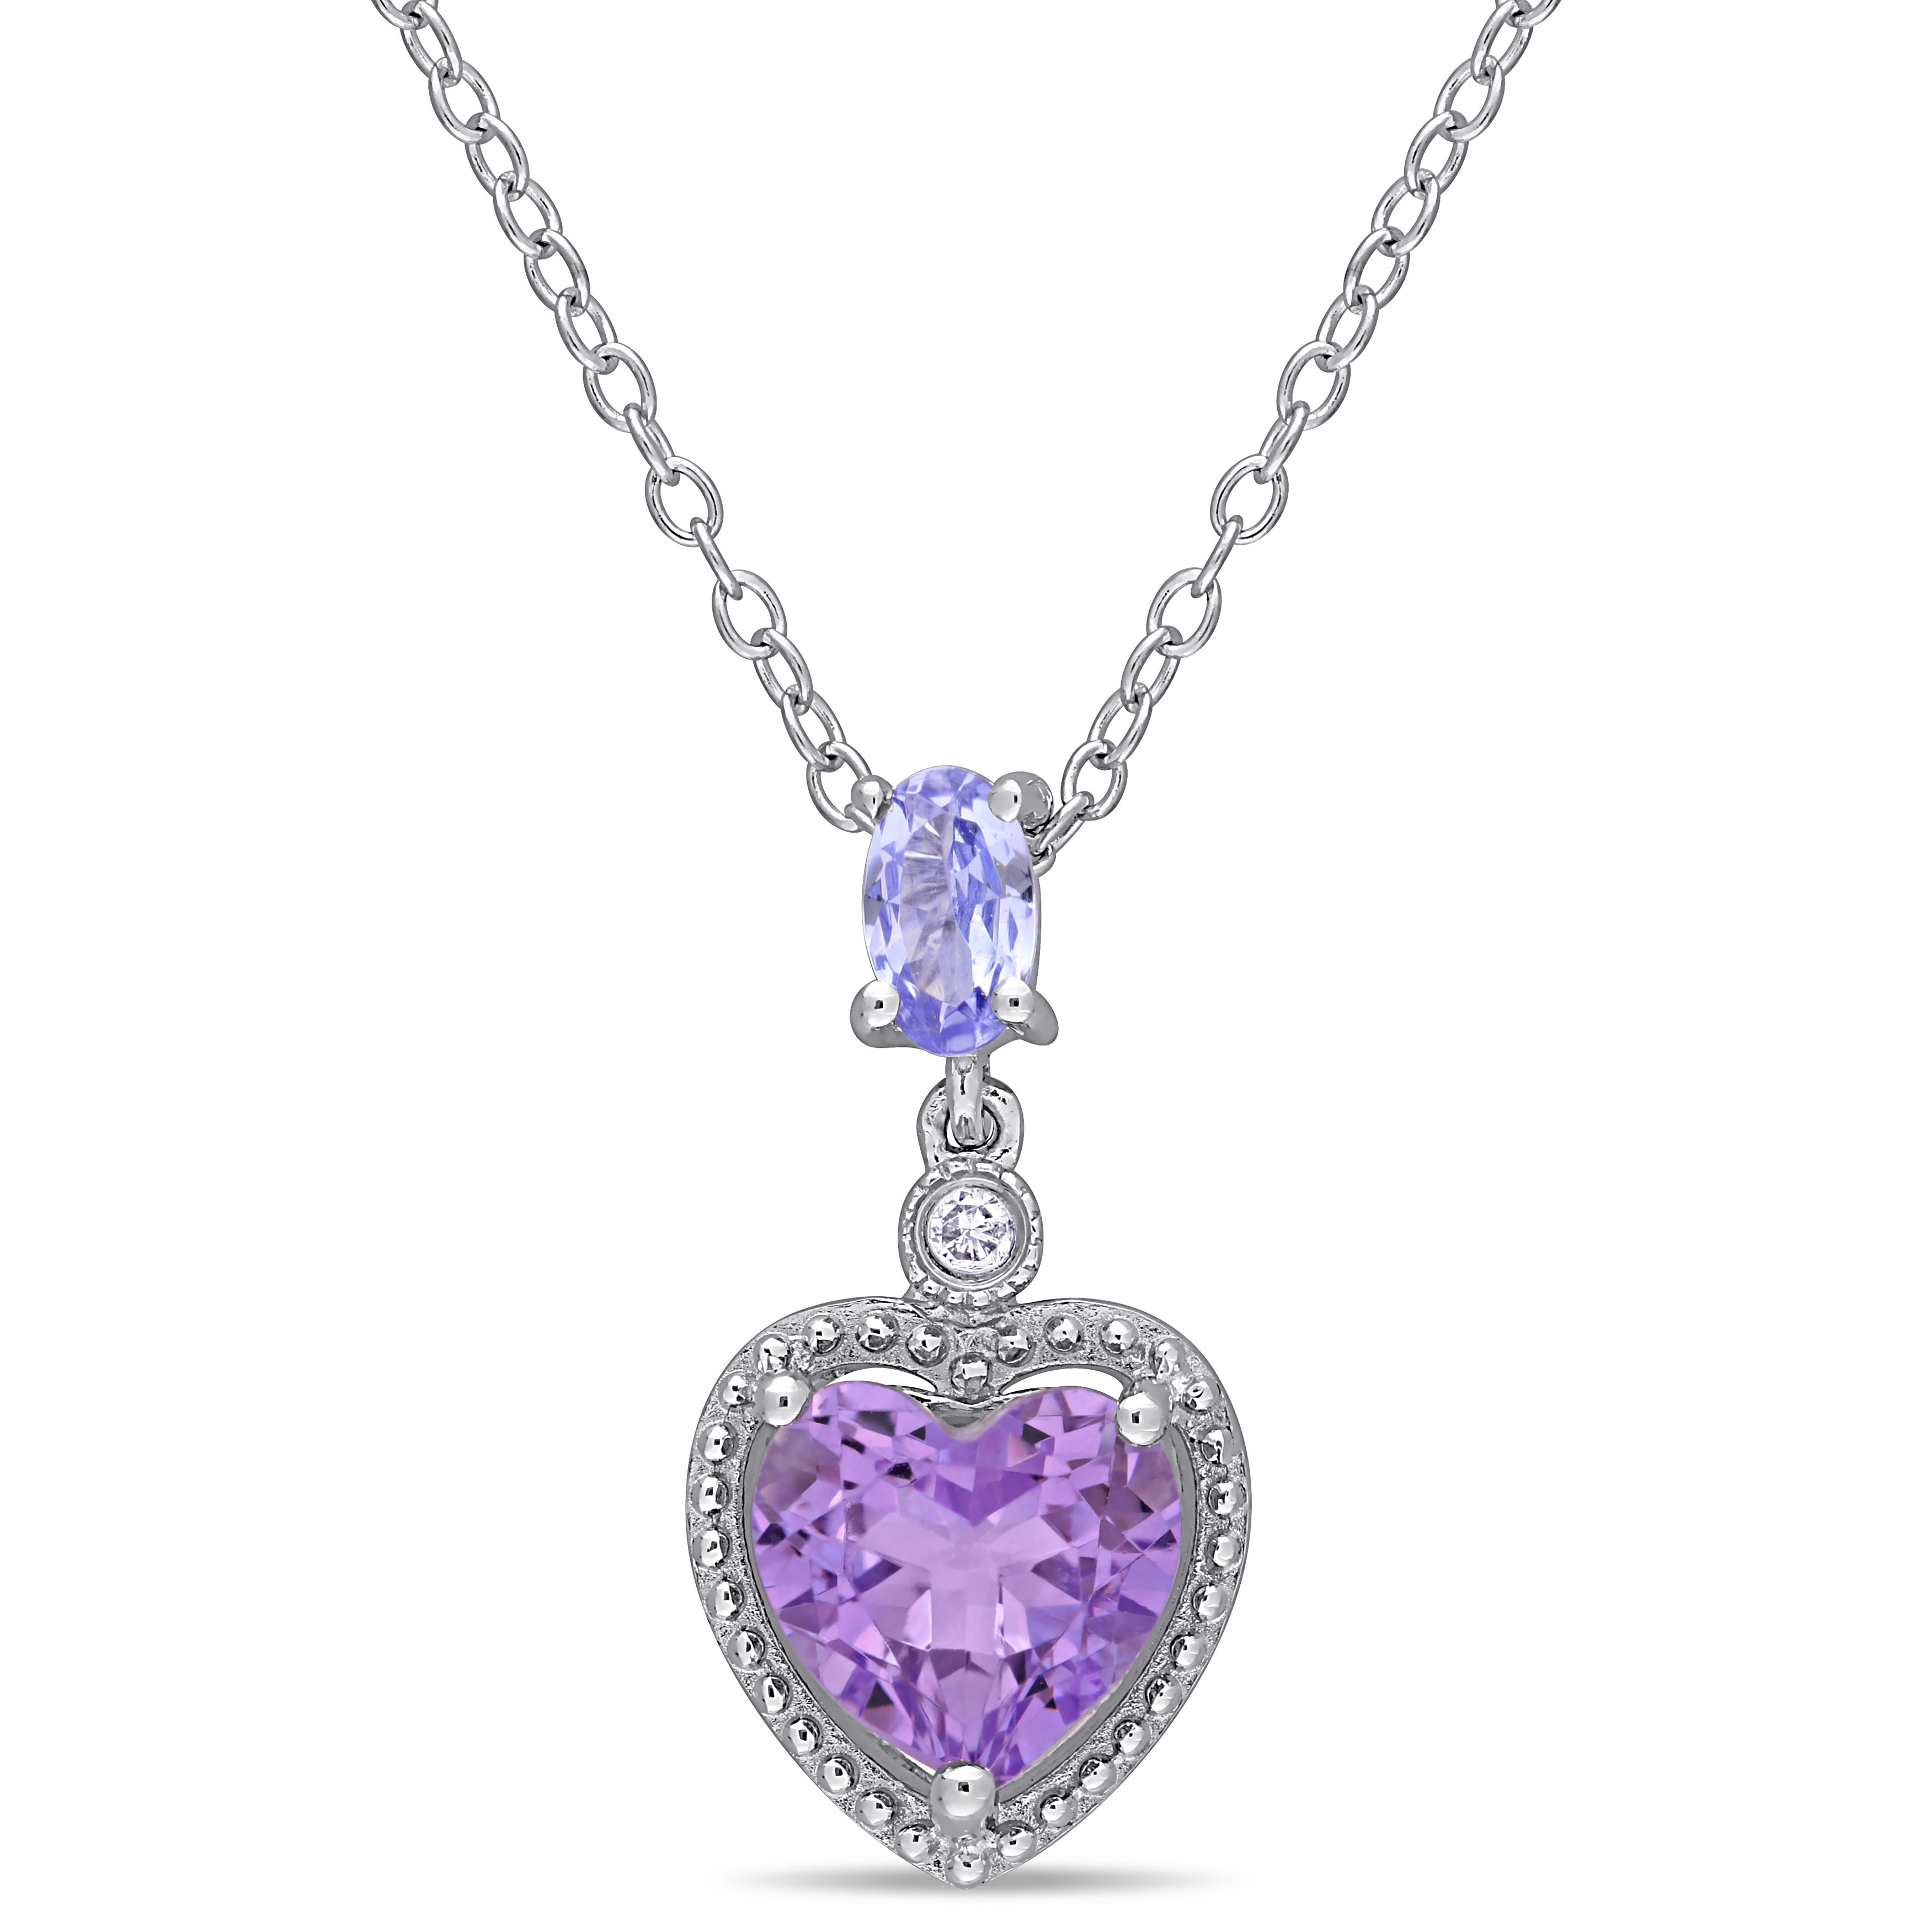 Diamond, Tanzanite, and Heart Shaped Amethyst Pendant with Chain in Sterling Silver